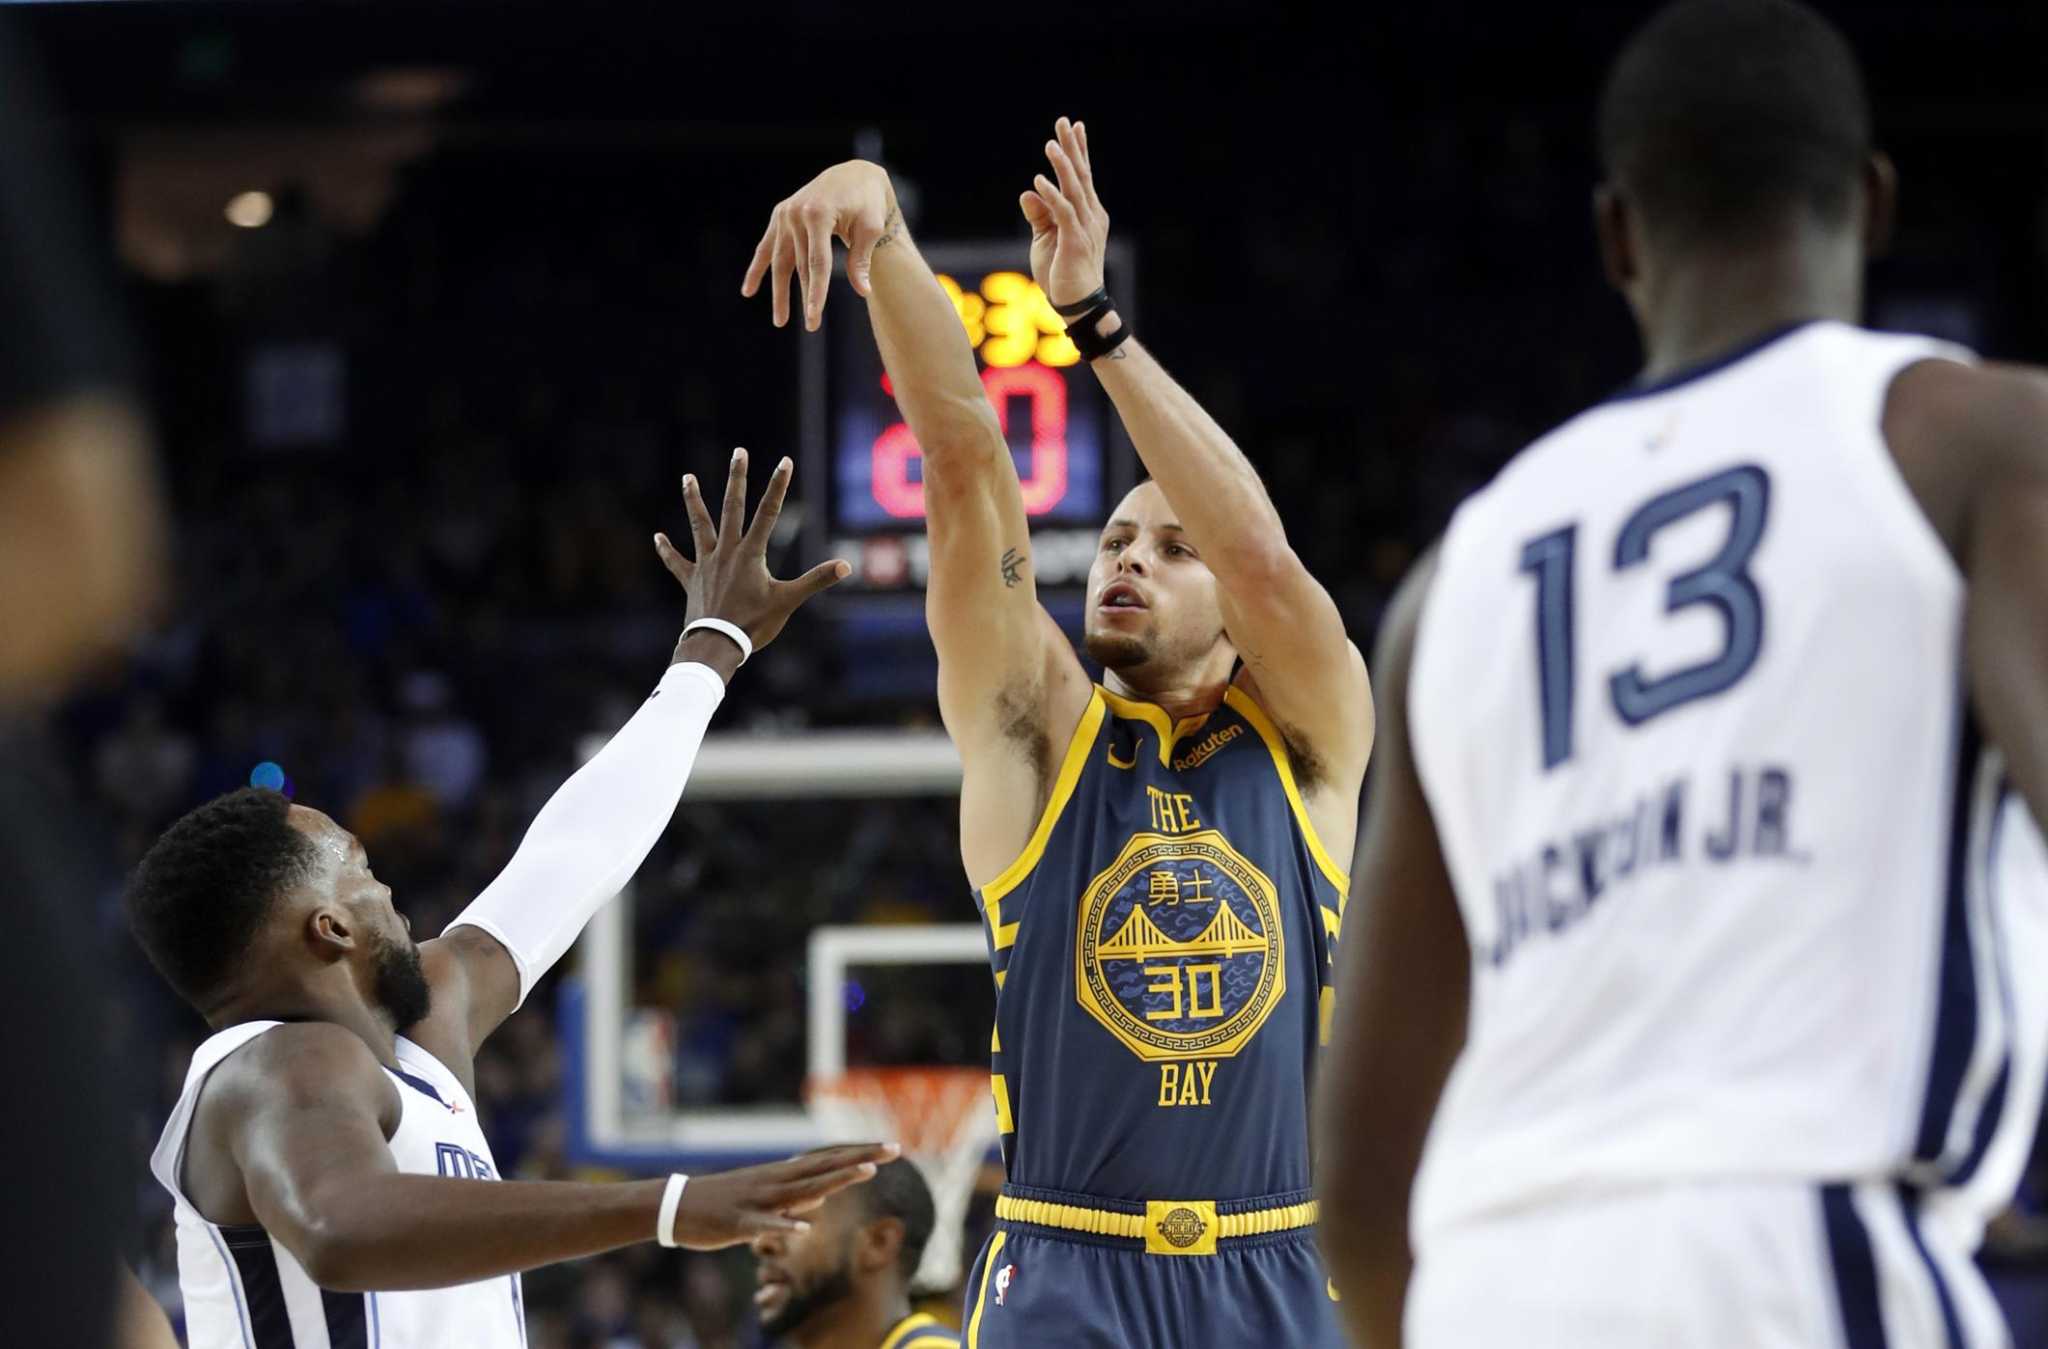 Stephen Curry says night night after hitting clutch 3 vs Cavs